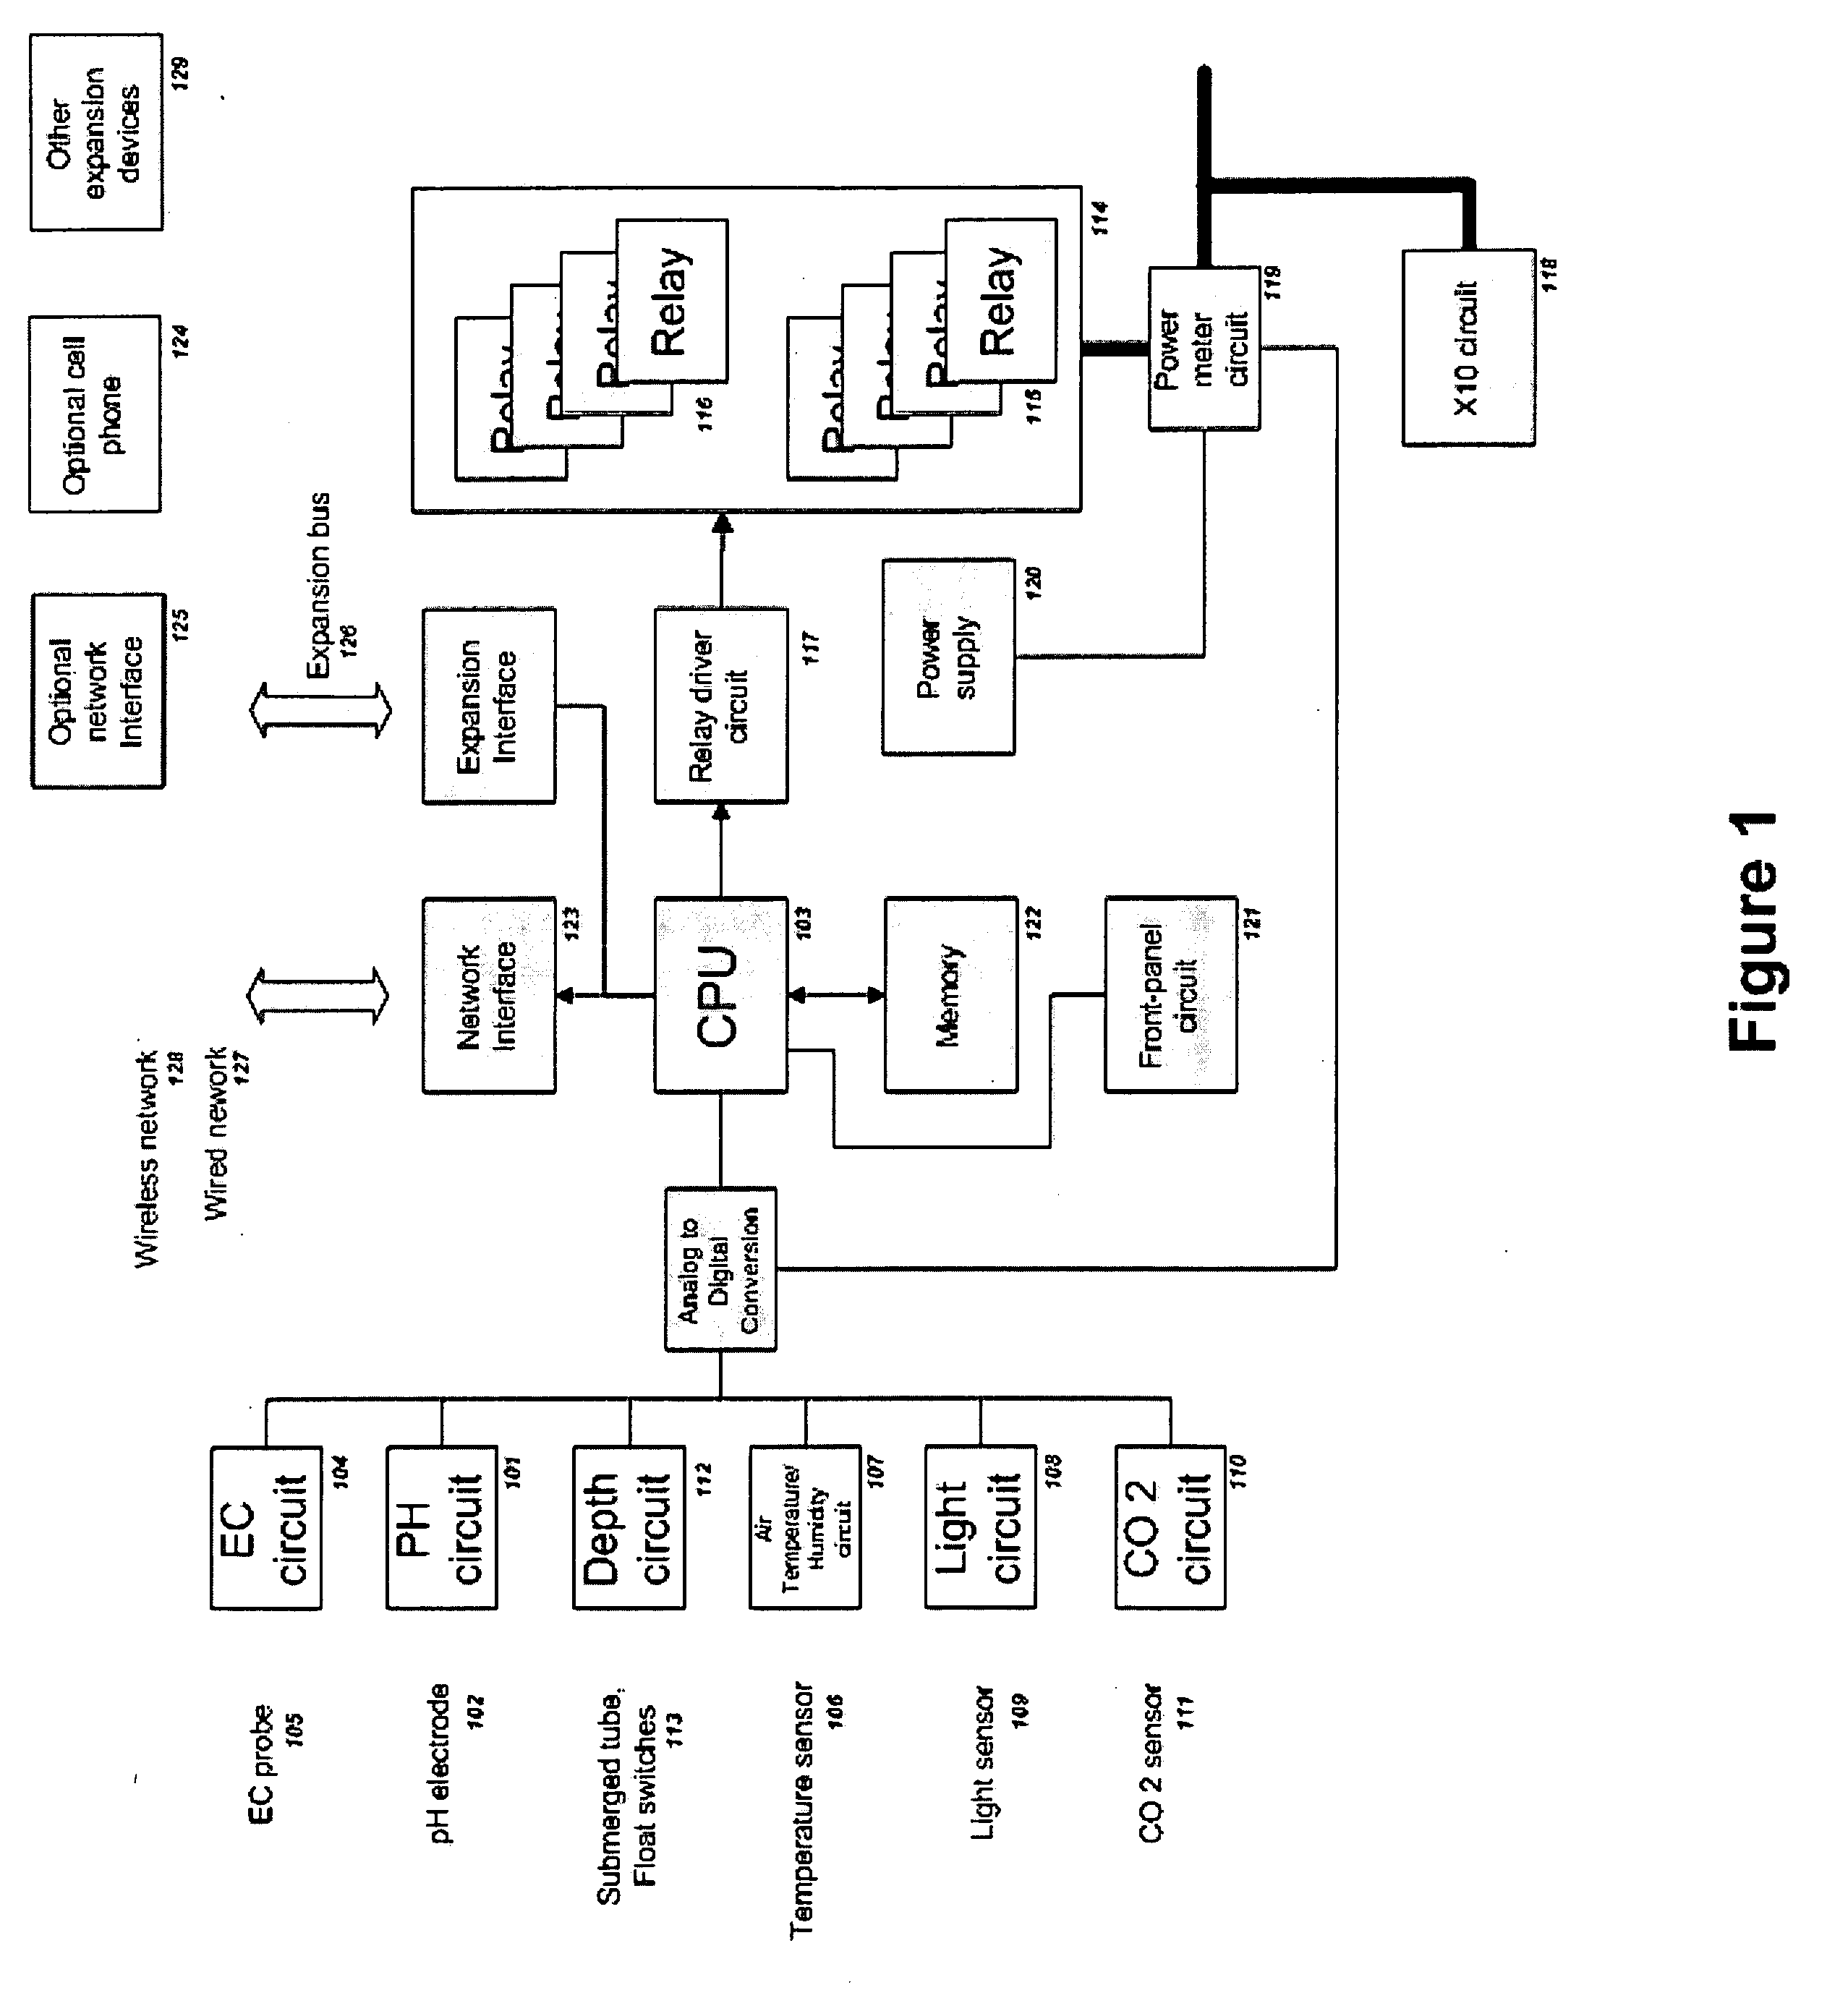 Hydroponic Monitor And Controller Apparatus with Network Connectivity and Remote Access